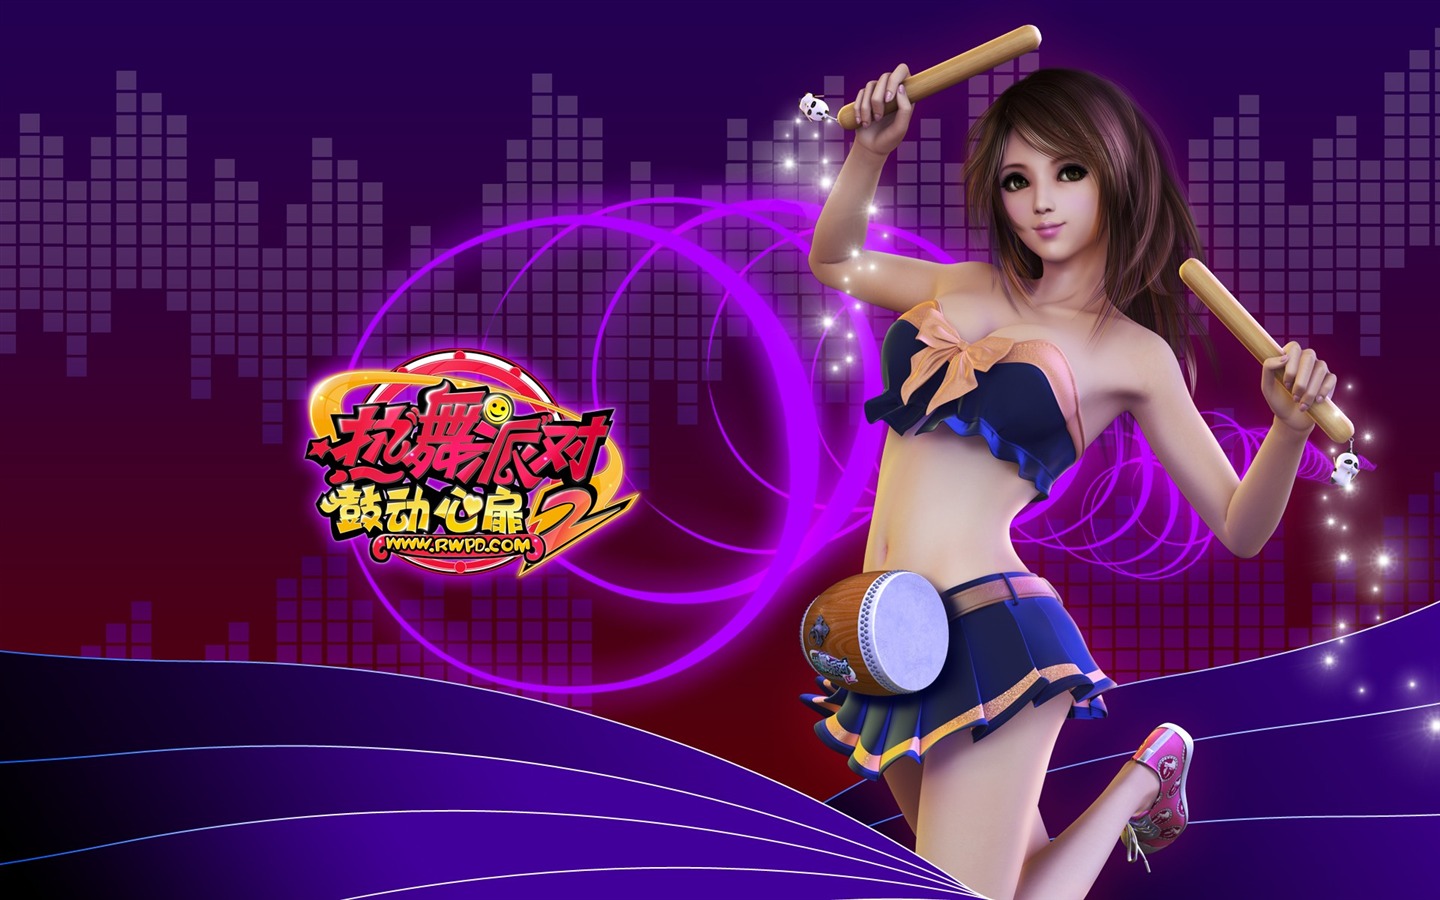 Online game Hot Dance Party II official wallpapers #17 - 1440x900